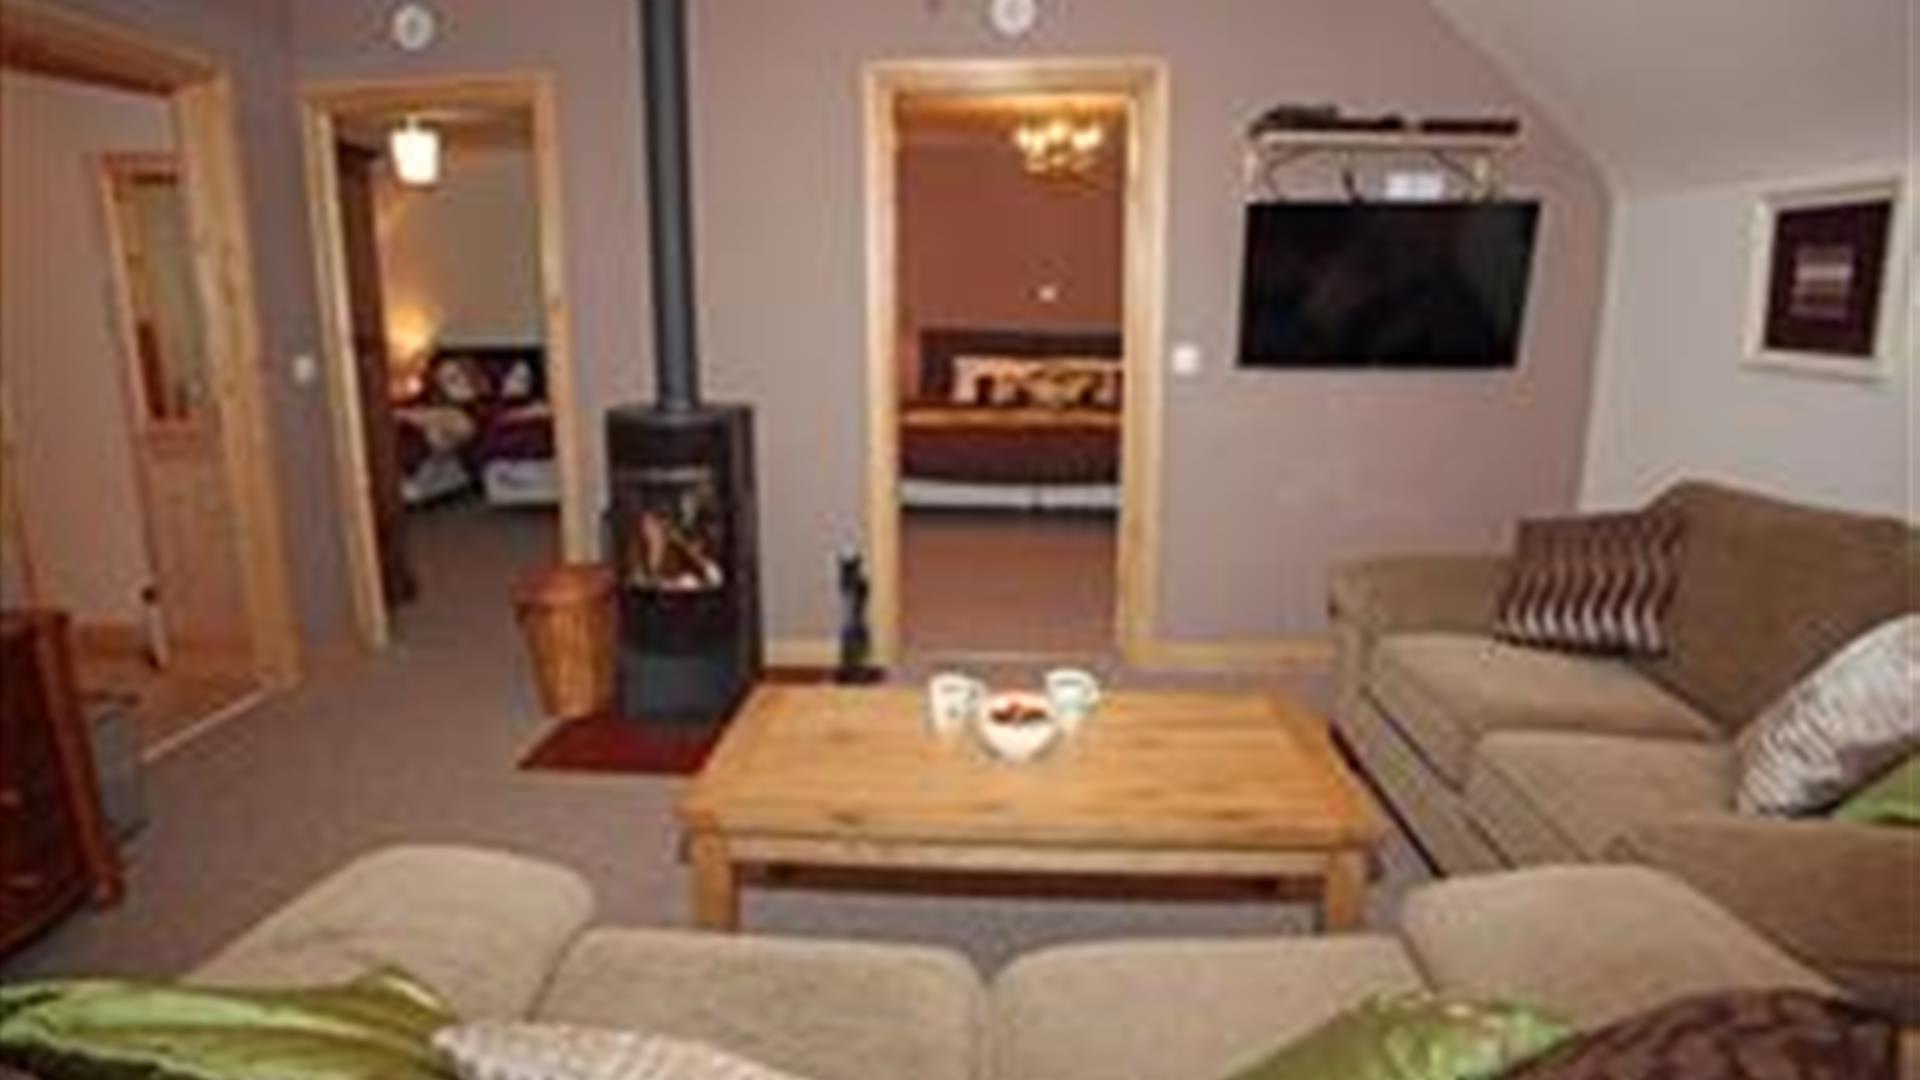 Fermanagh Self Catering - Lakeview